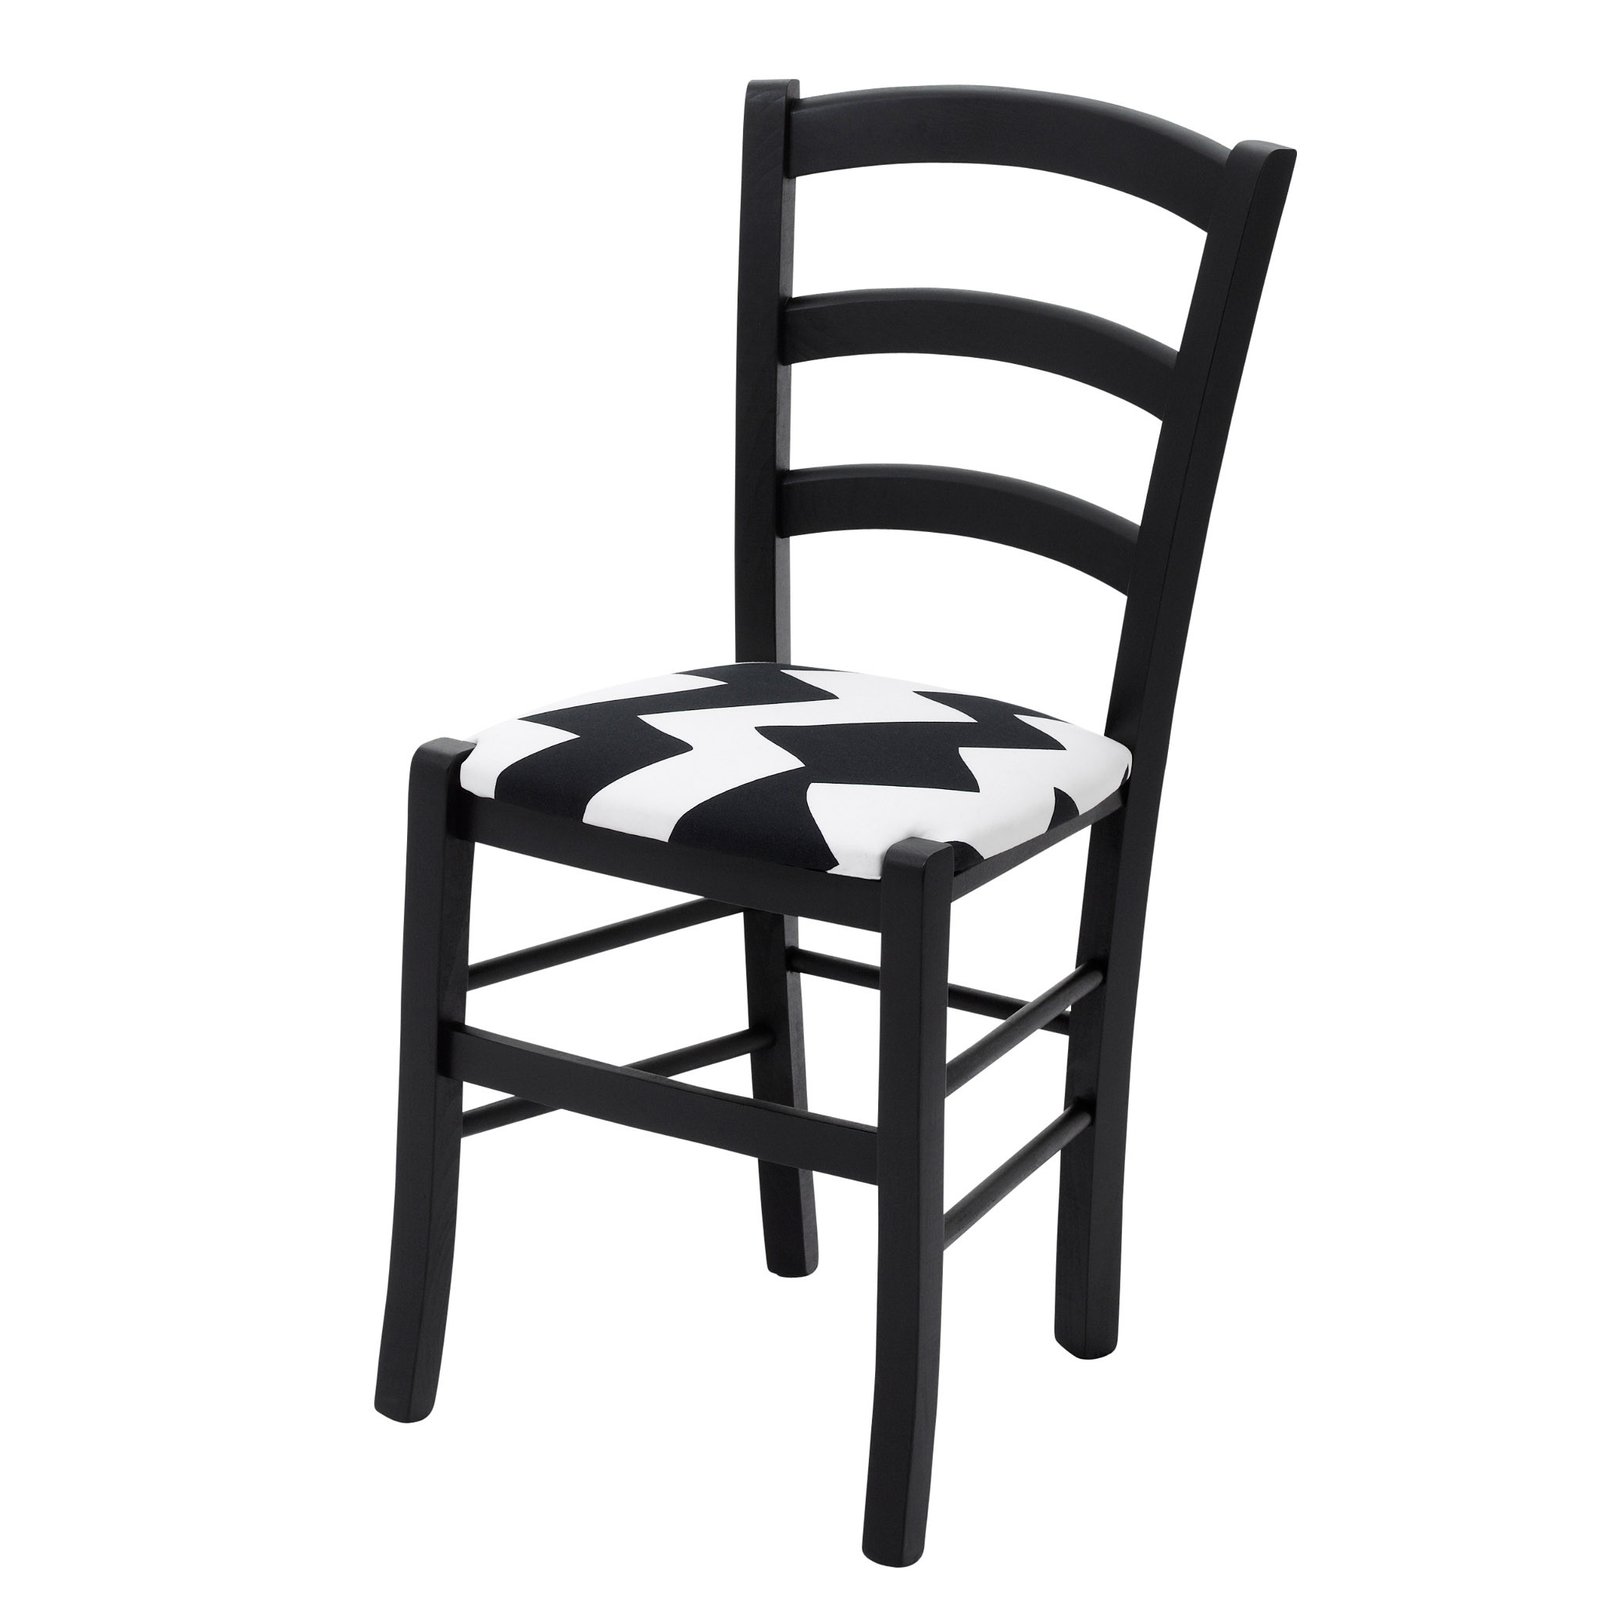 Black Kitchen Chair Daisy By Cheeky Chairs With Tizzy Peaks Fabric